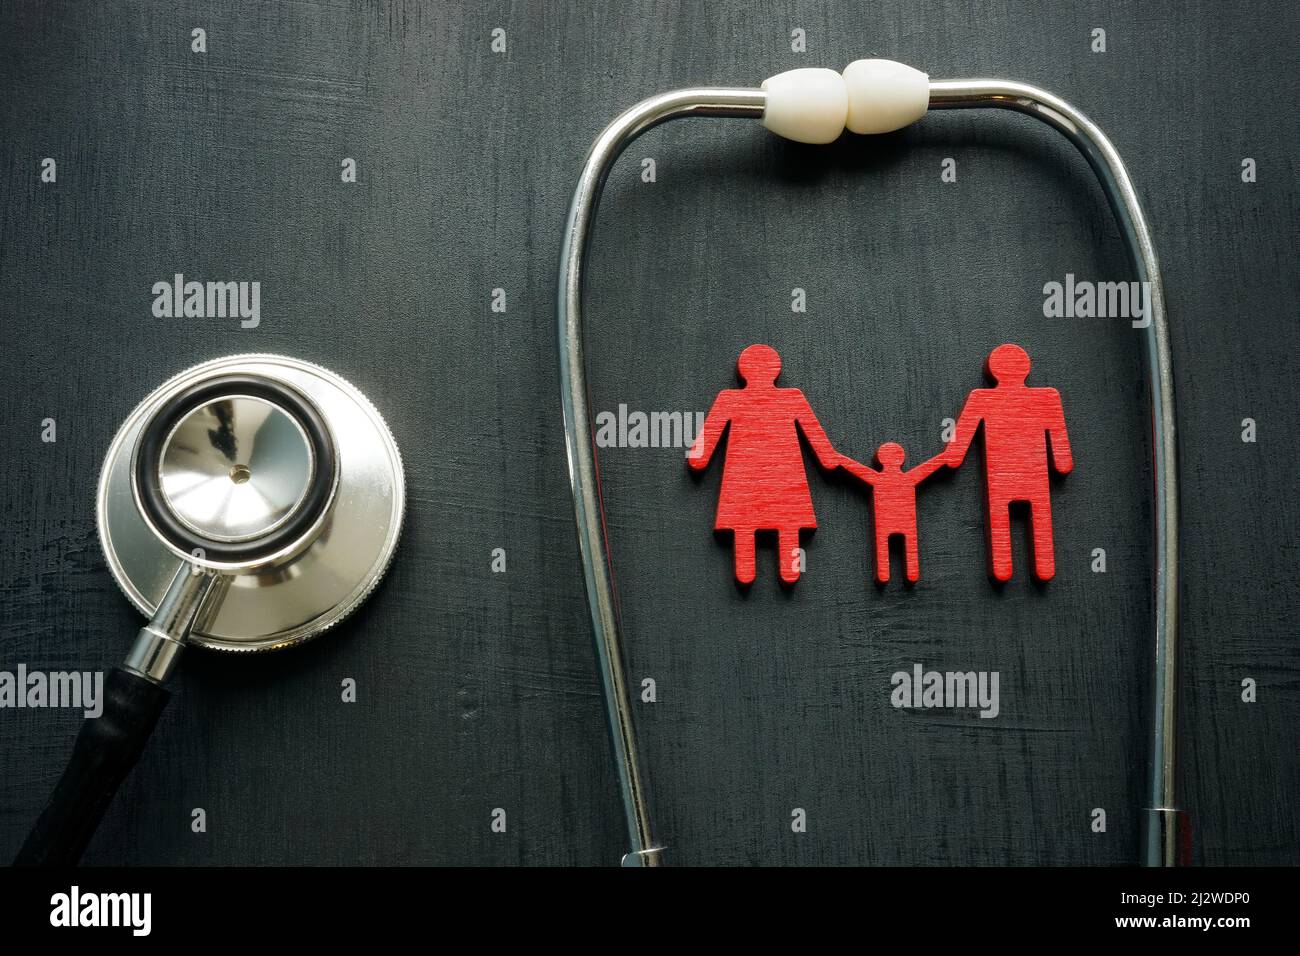 Family medicine and health insurance concept. Stethoscope and figurines. Stock Photo